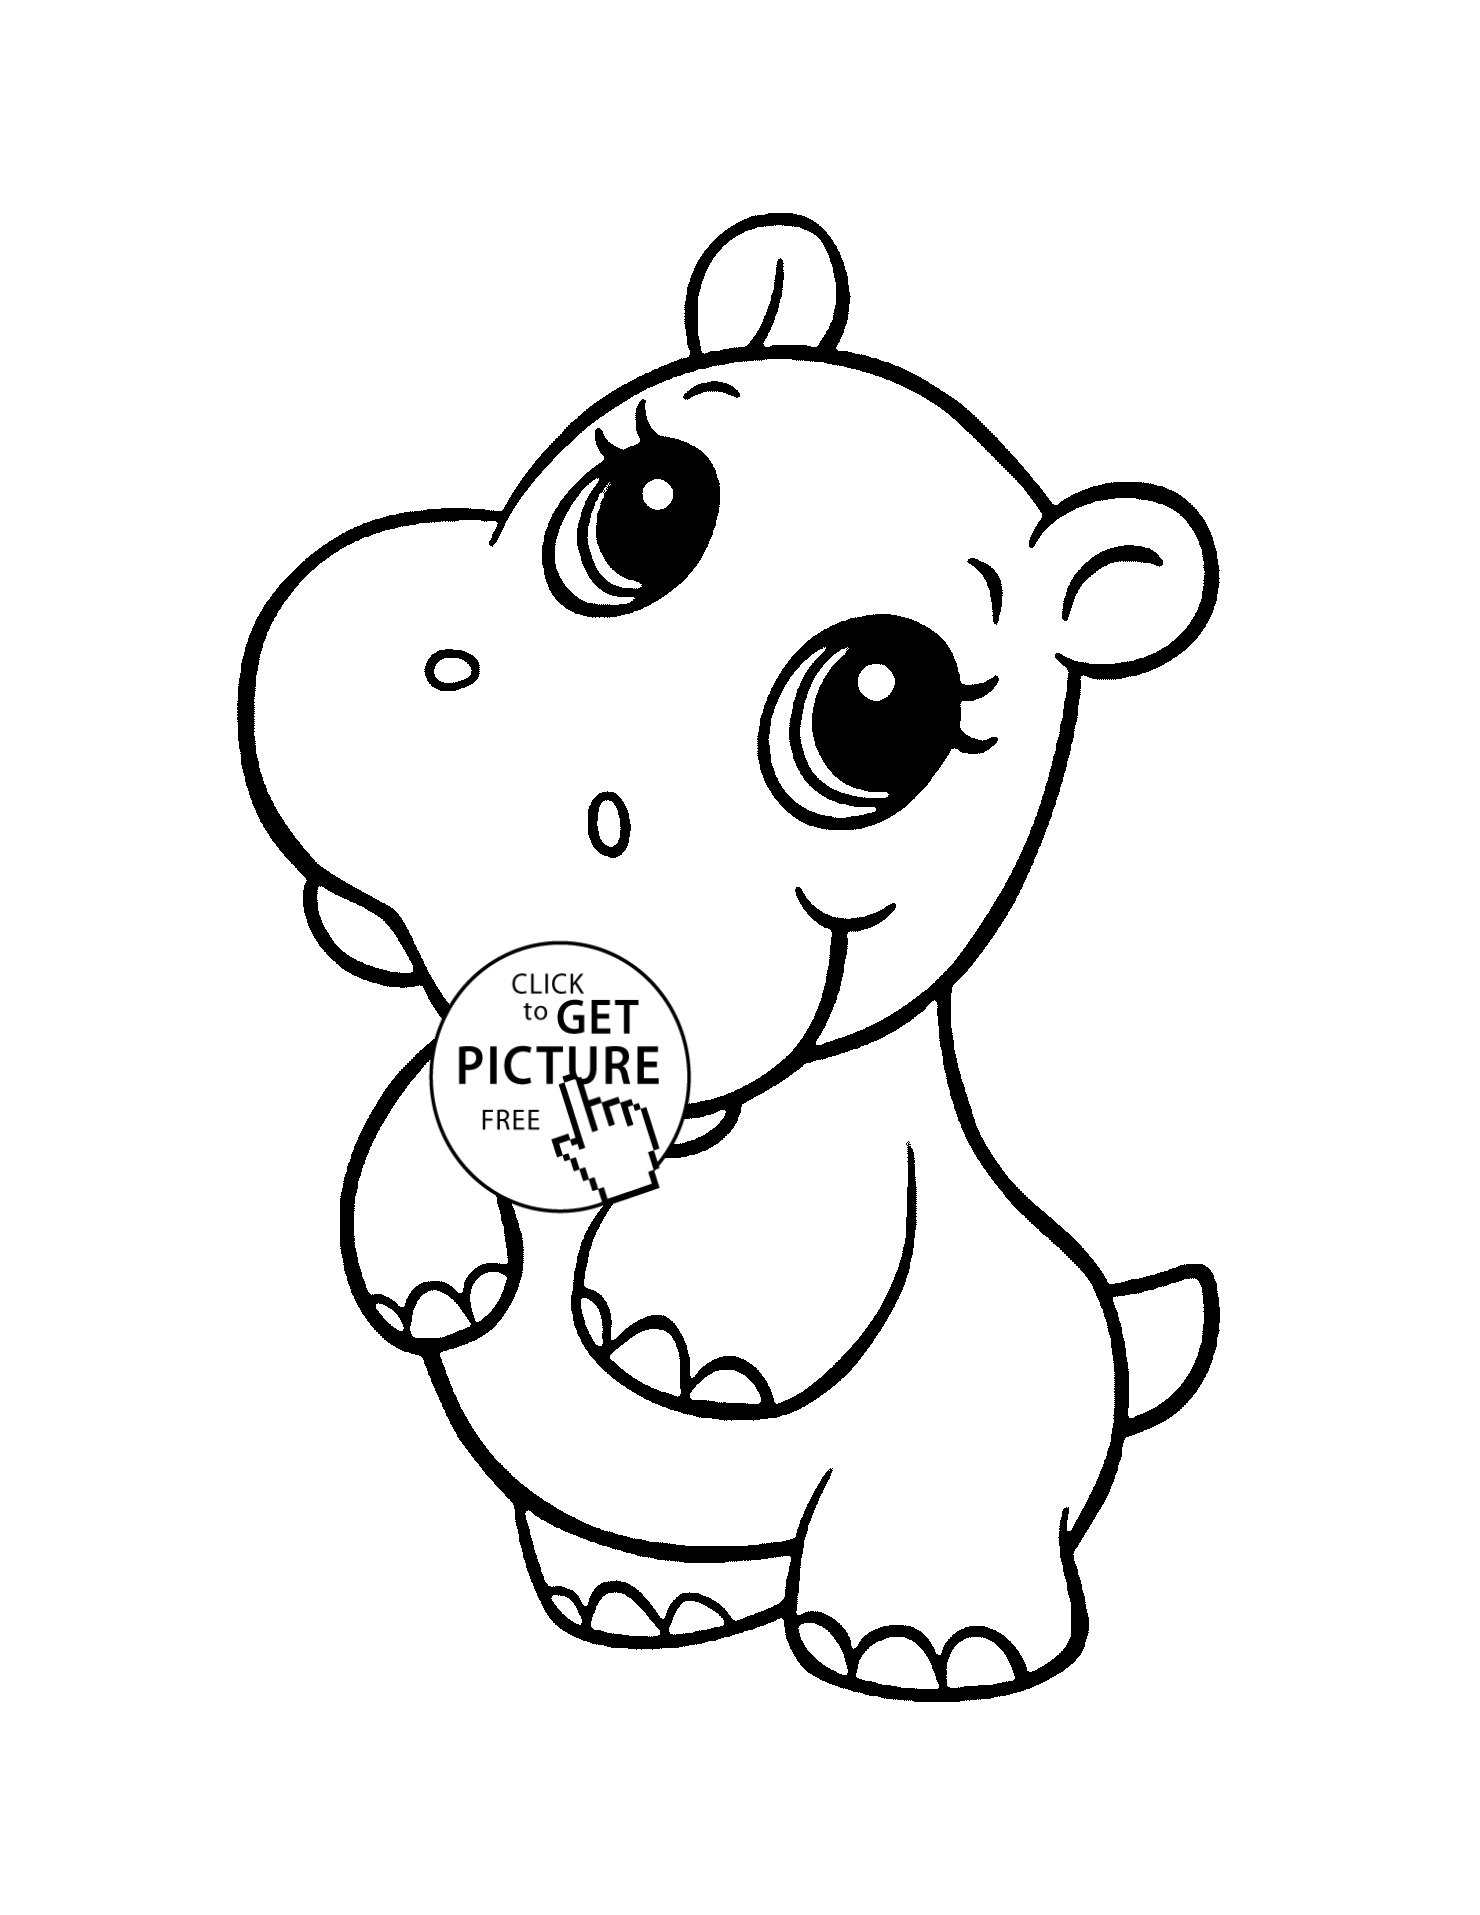 Cute Animal Printable   Coloring Pages For Kids And For Adults ...